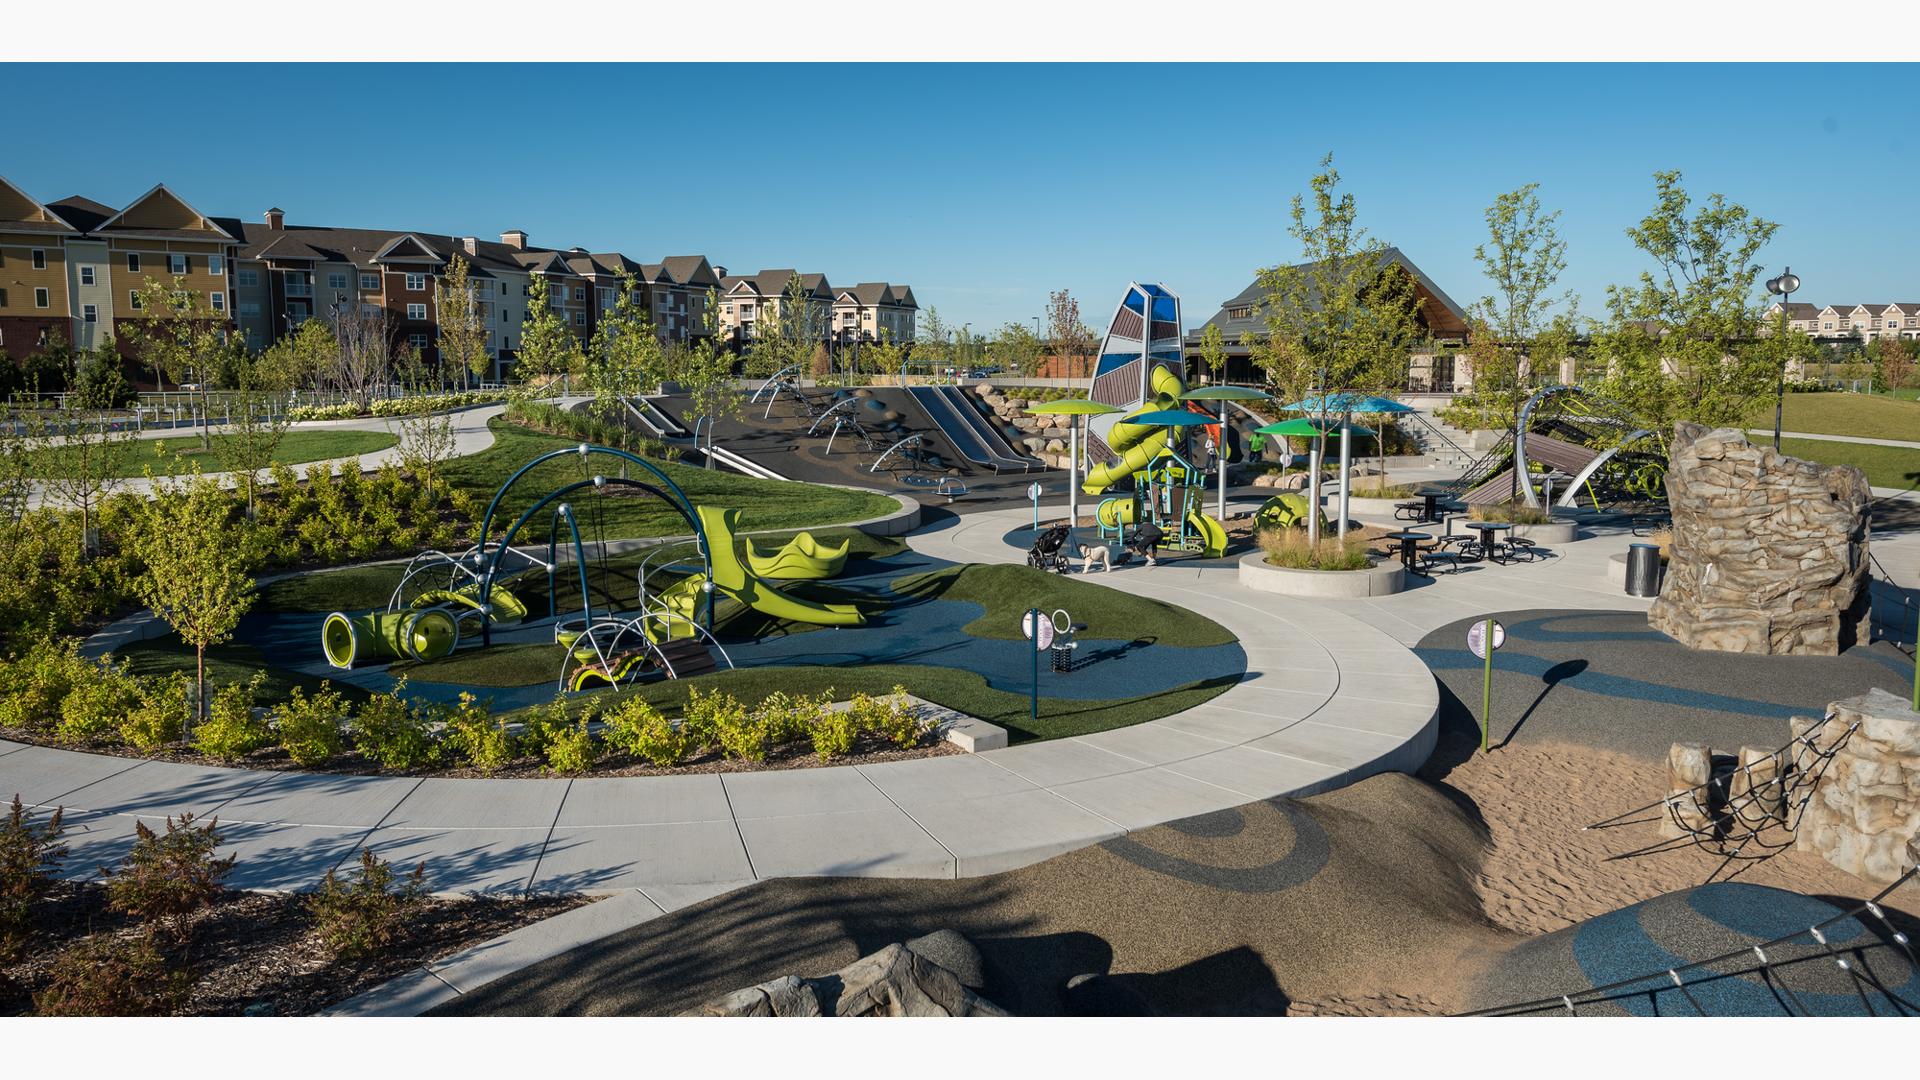 Park with several play areas including a rock climber, enclosed playground tower, climbing net climber and hillside slides with trees intermixed among the play spaces. 